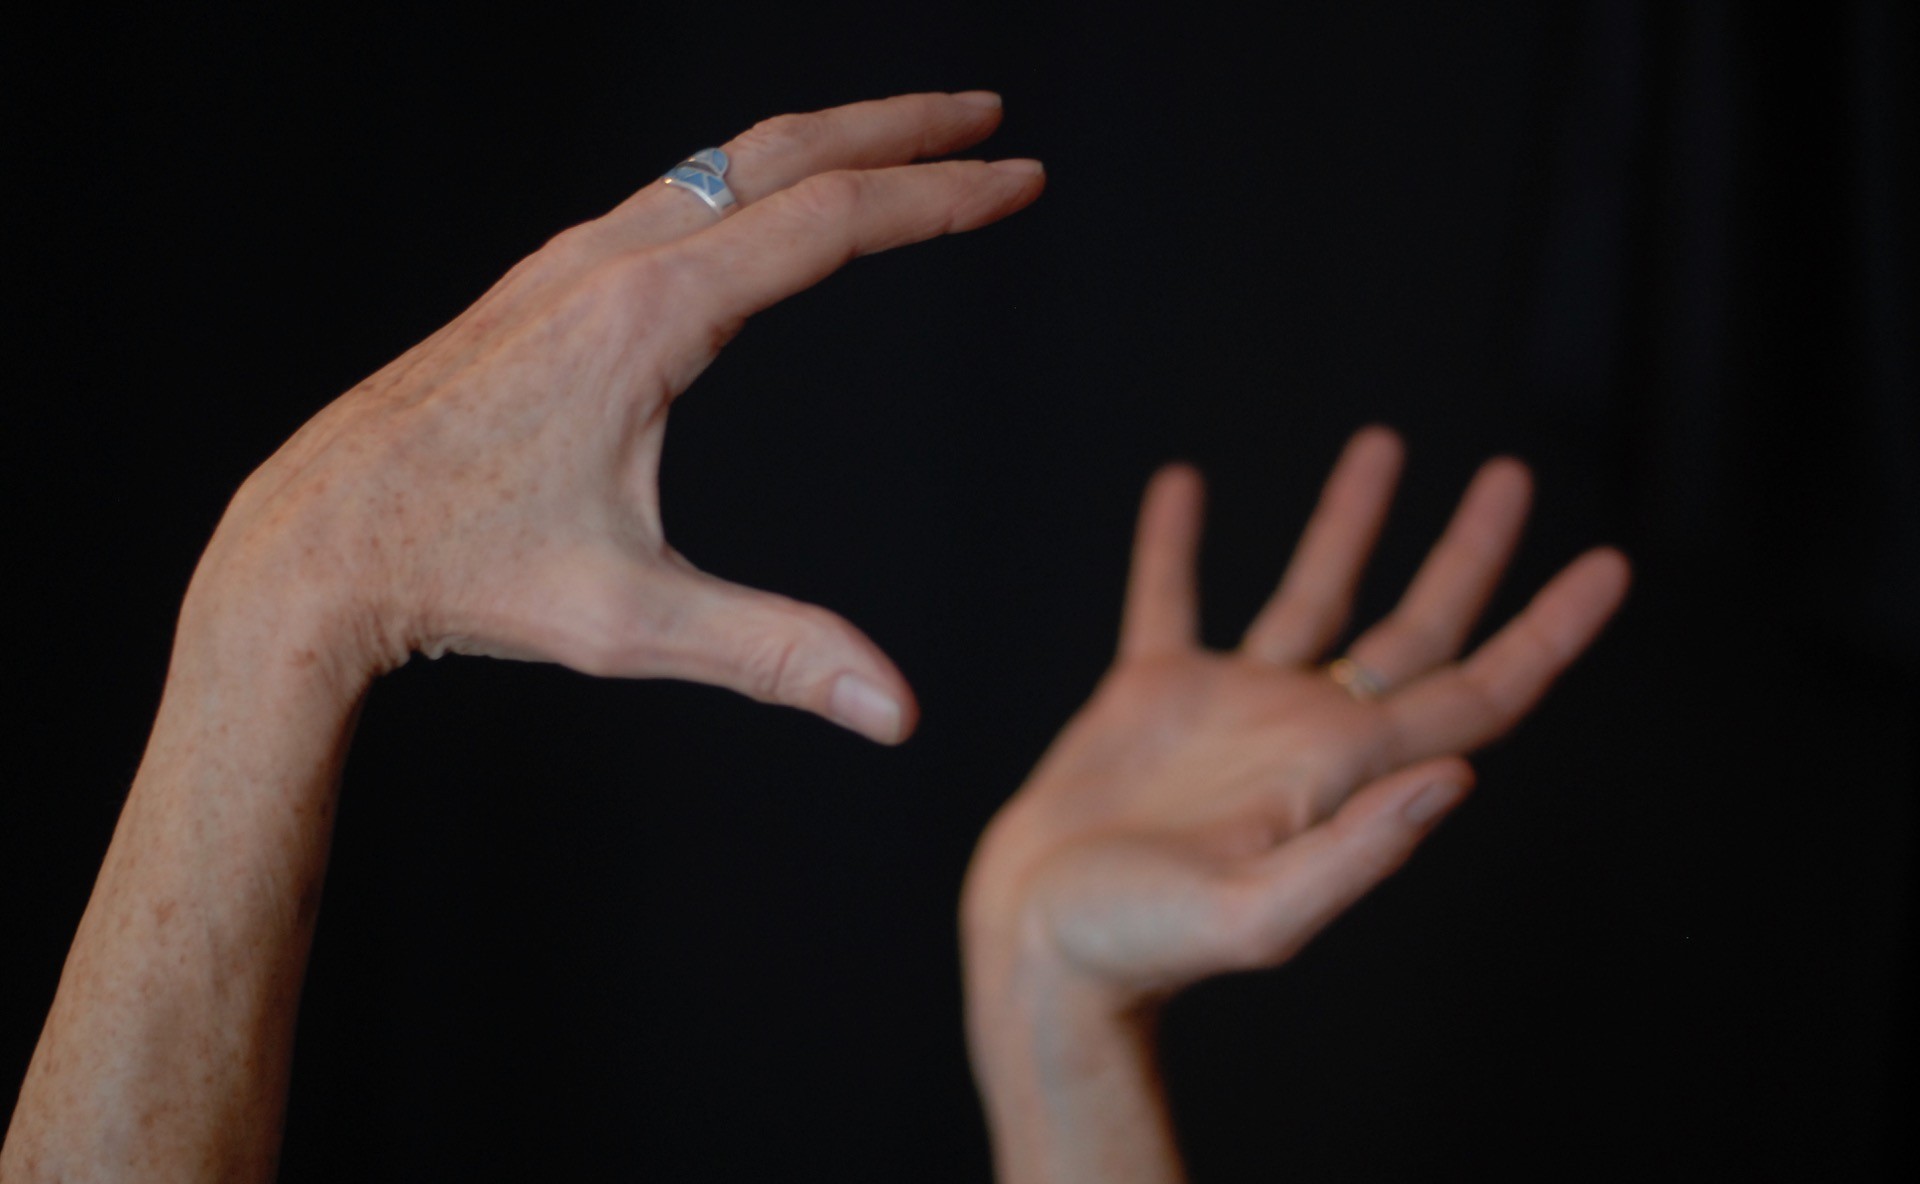 A storyteller’s hands grasp an unseen object, illustrating nonfiction narratives, which are complex and embedded